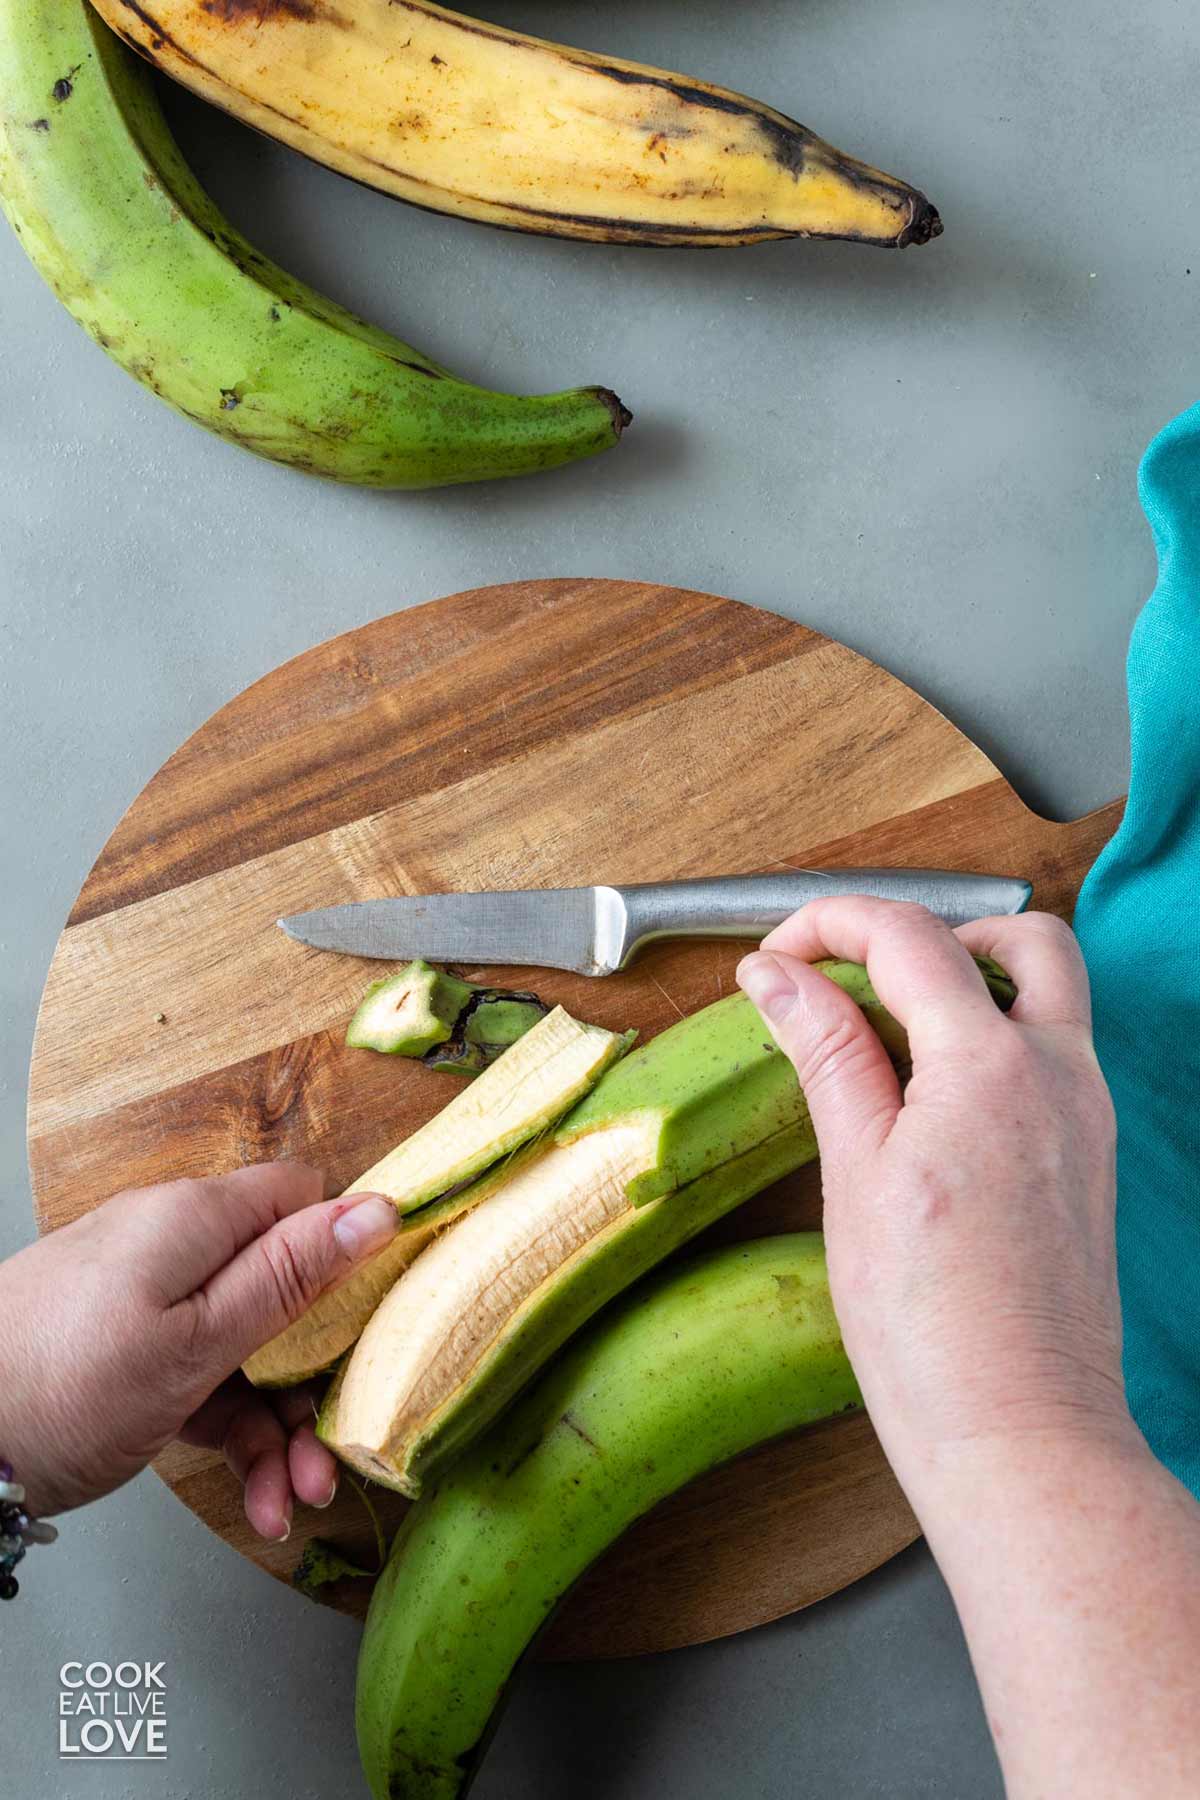 Peeling off the skin on the plantain.